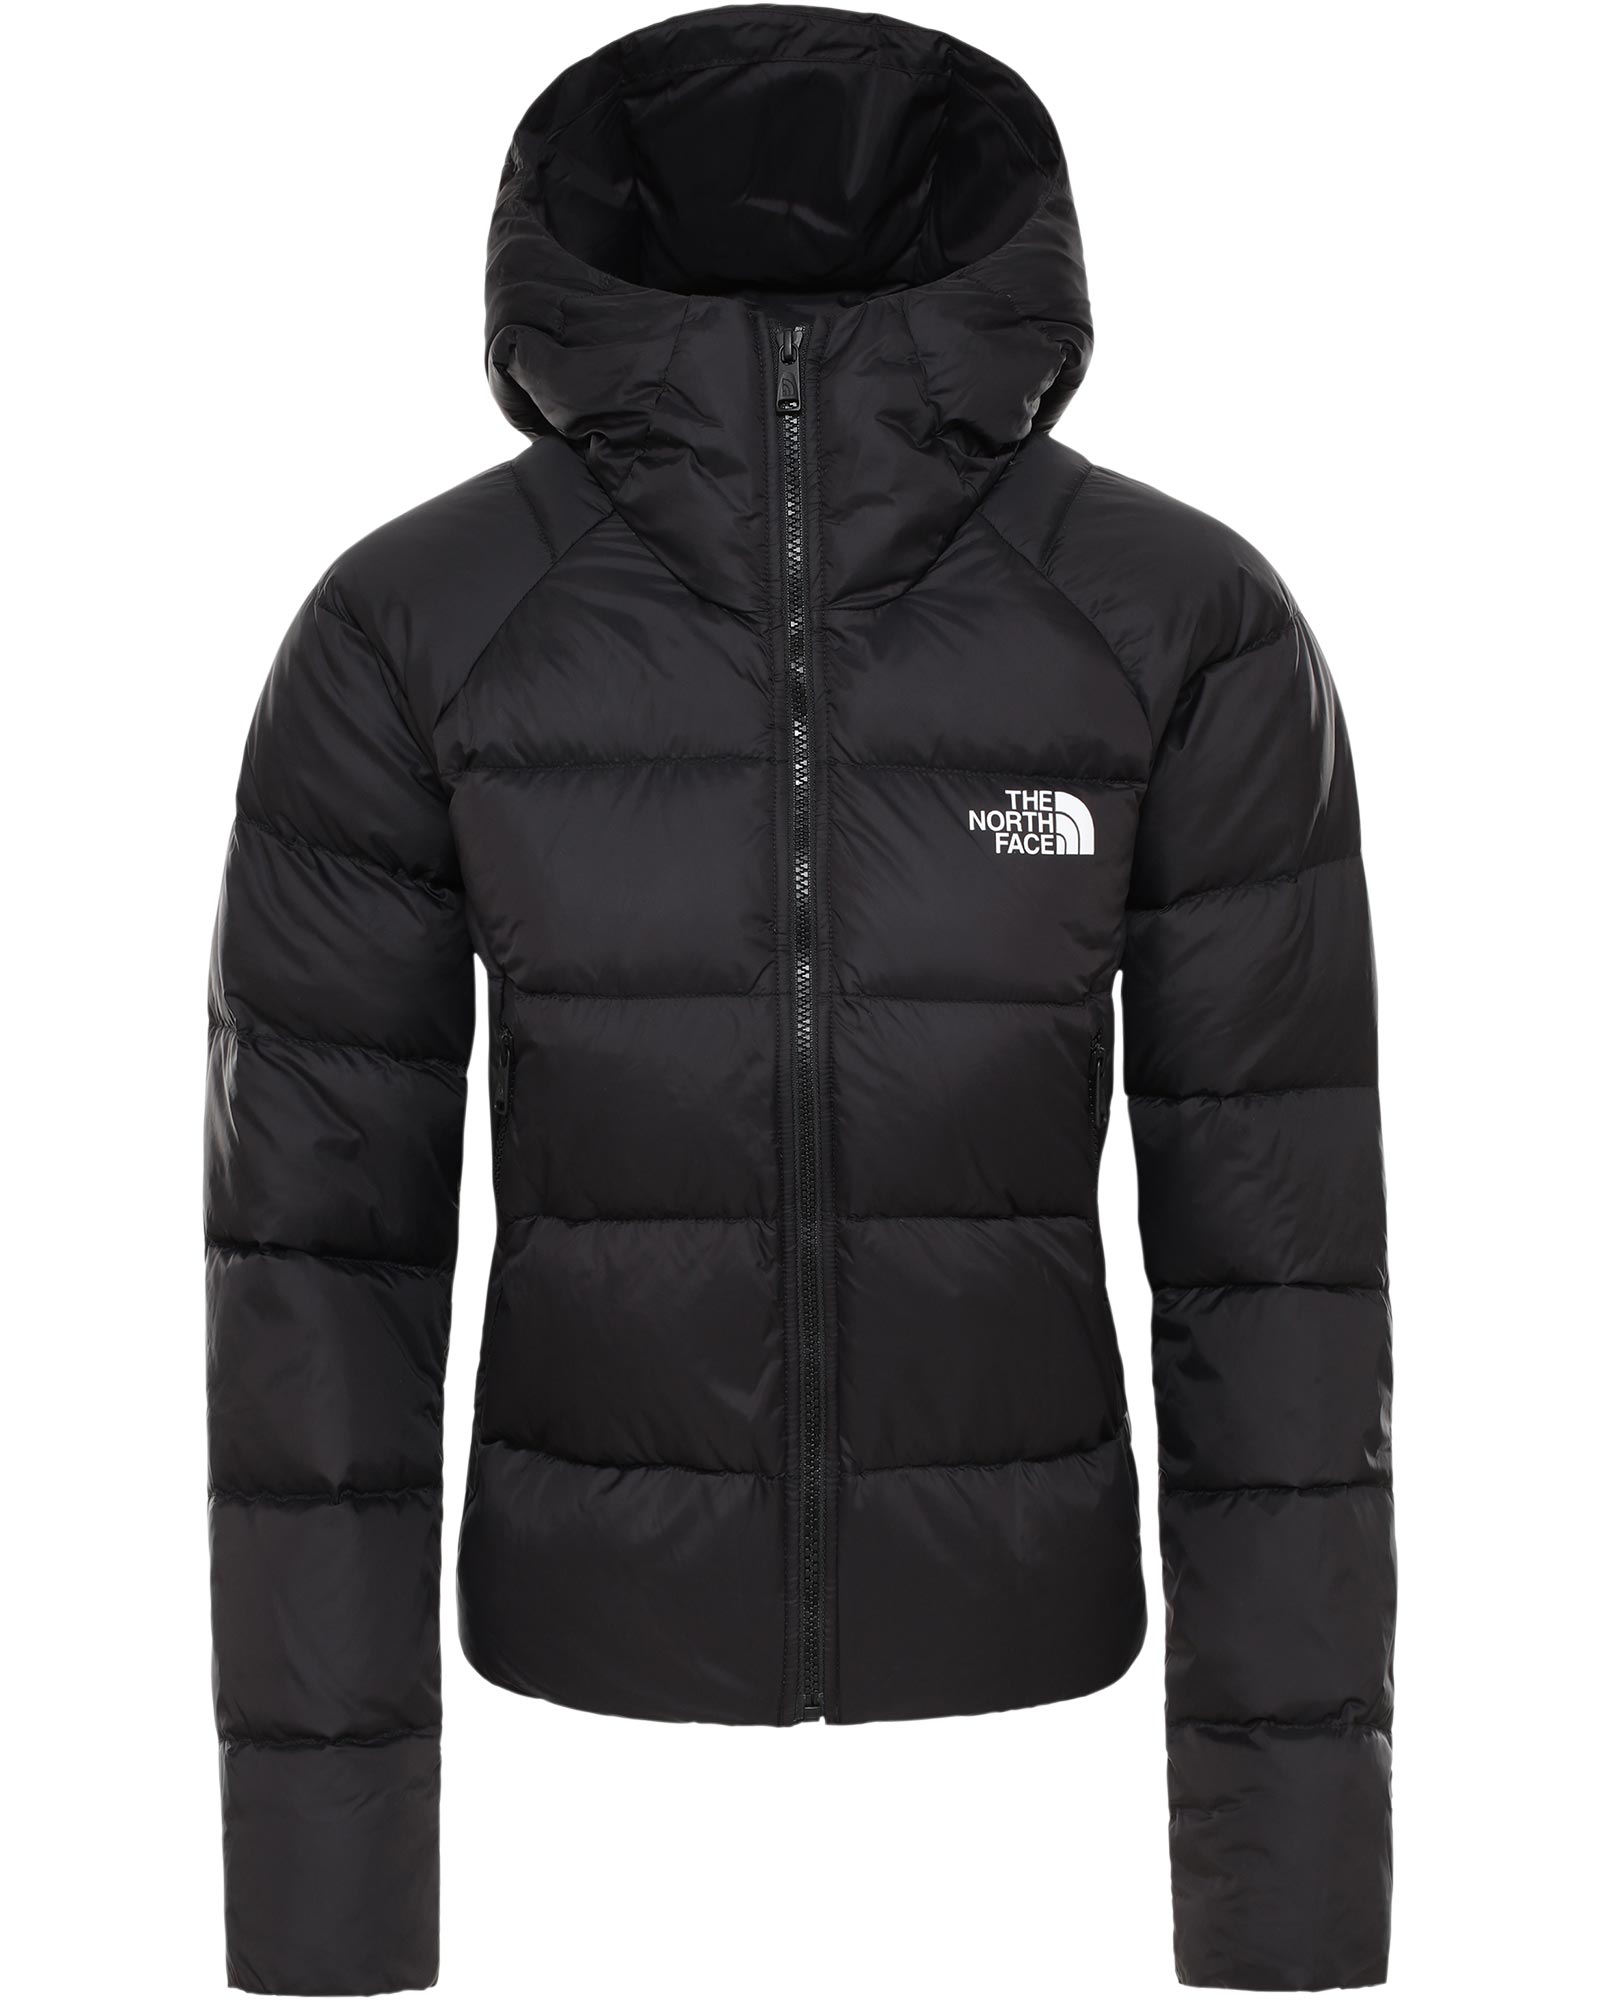 The North Face Hyalite Women’s Down Hoodie - TNF Black XS